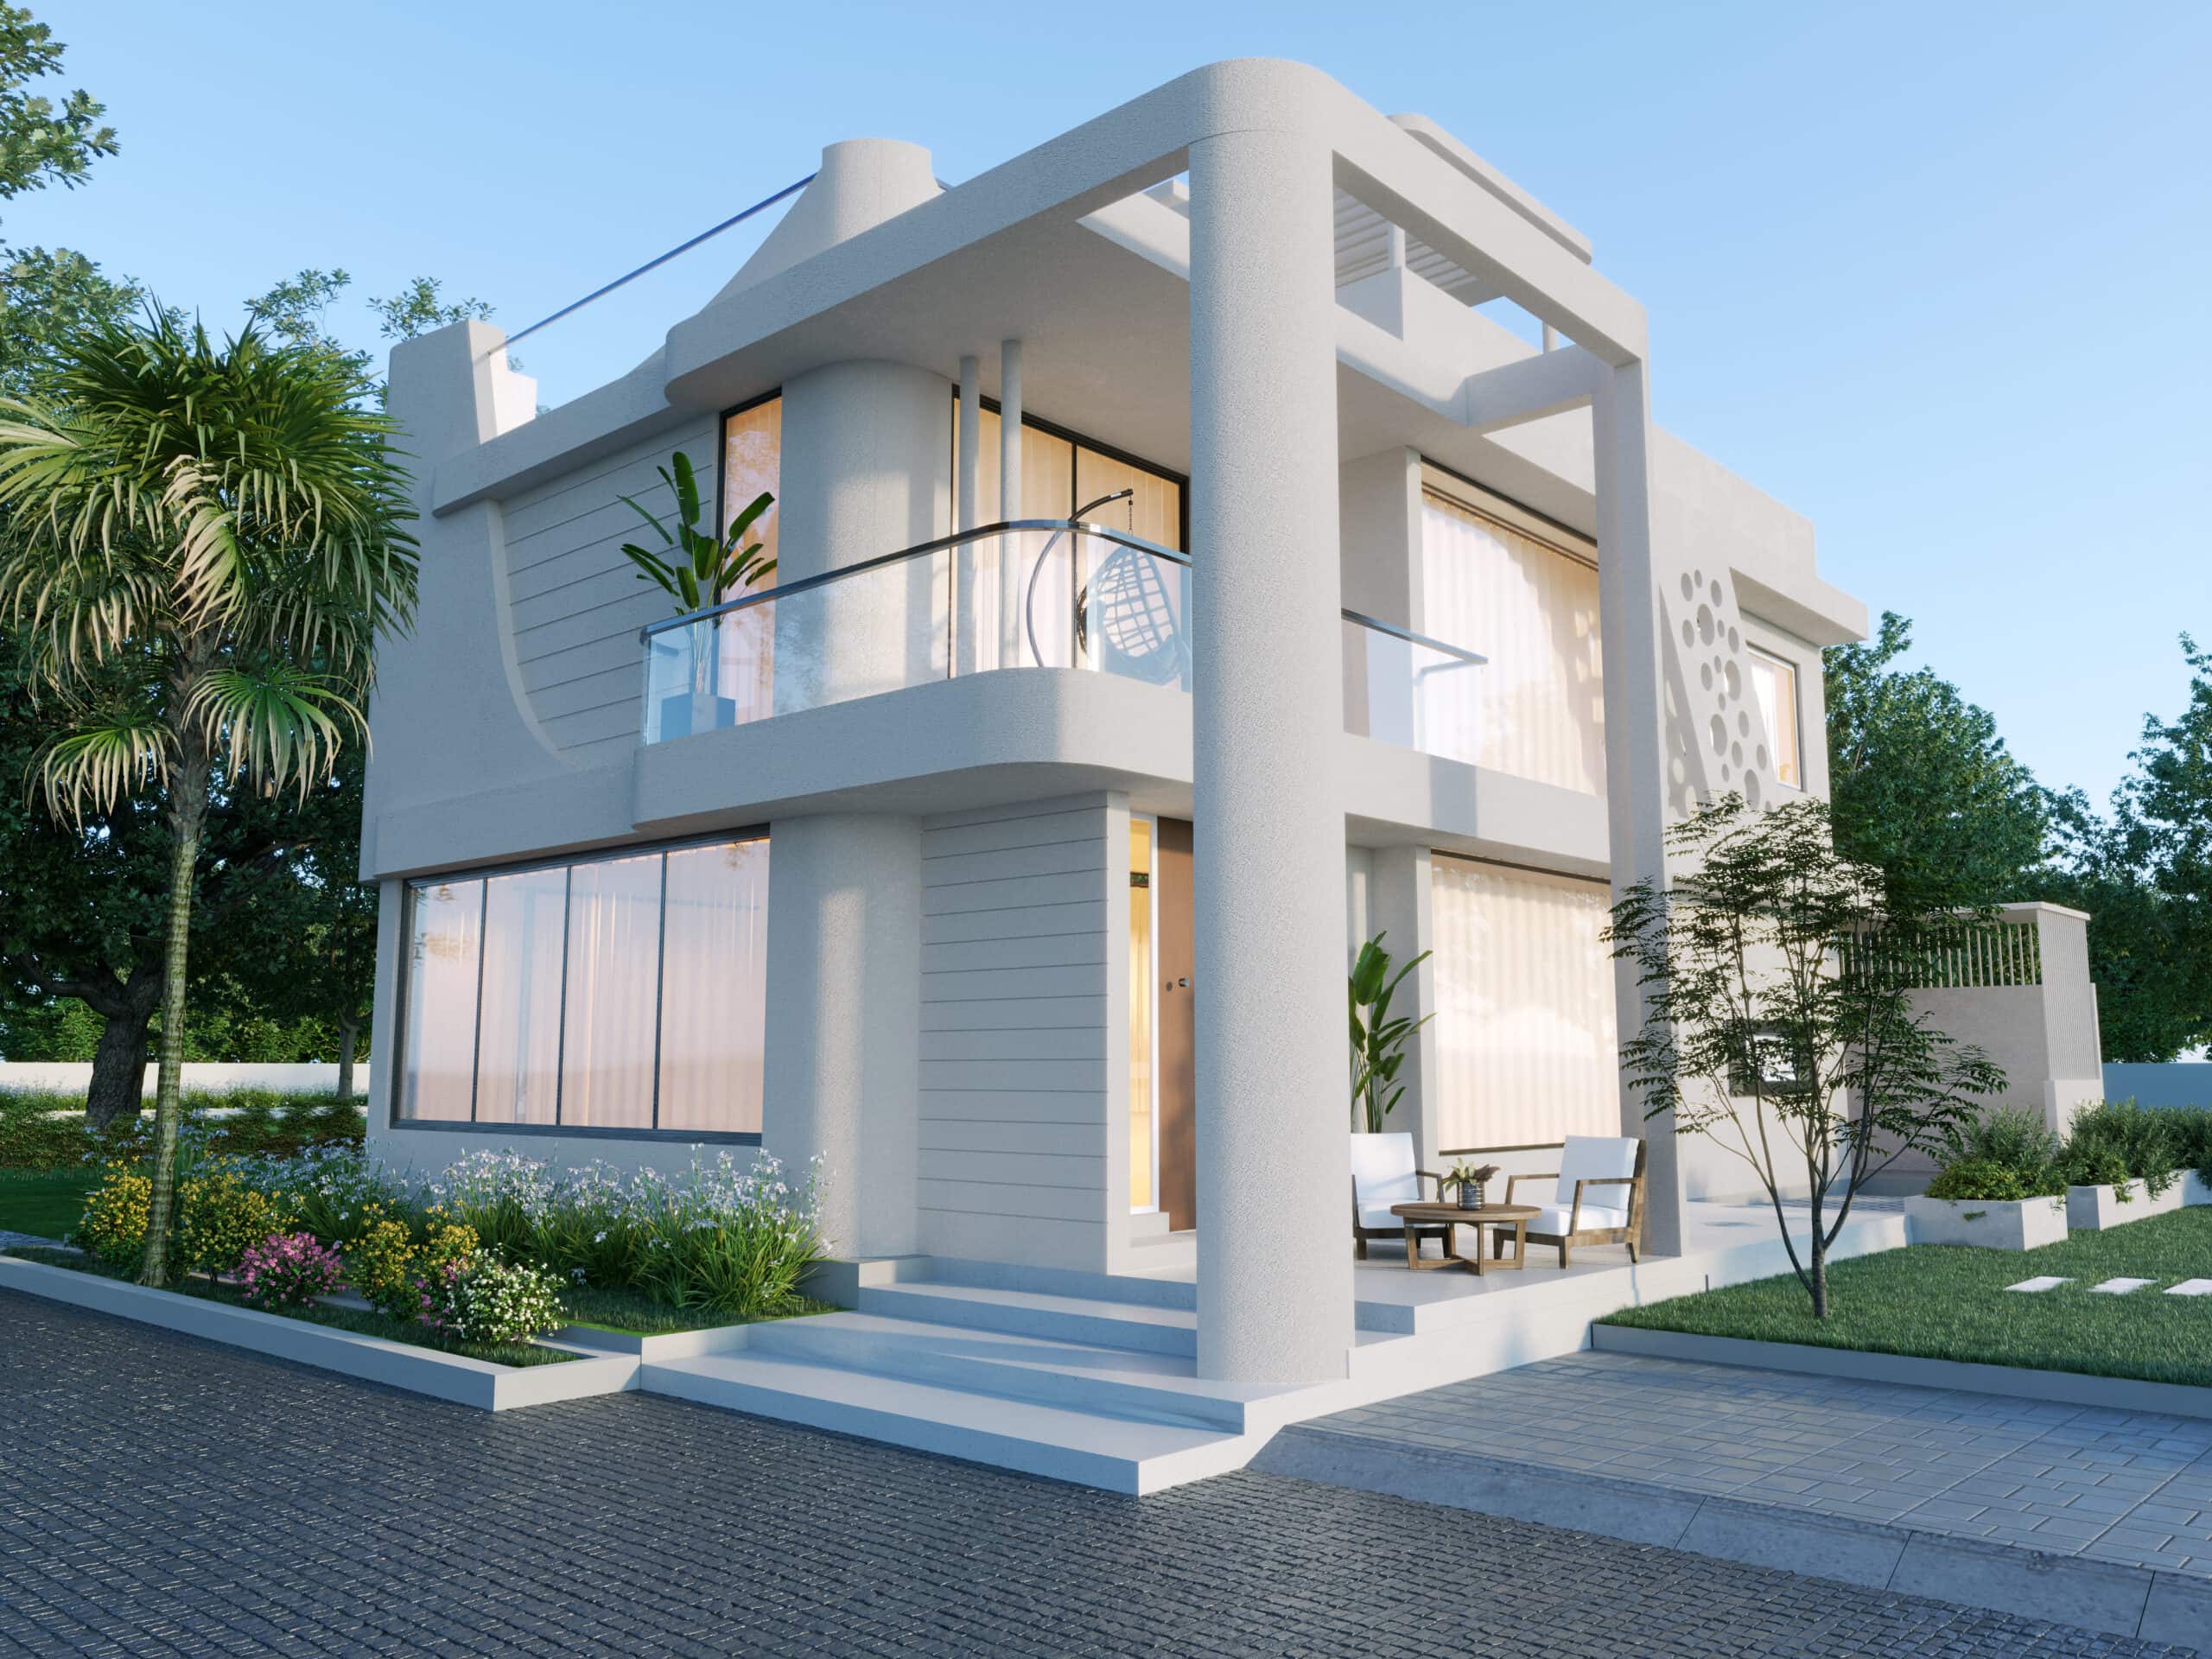 Front View of Small Bungalow House Exterior Rendering